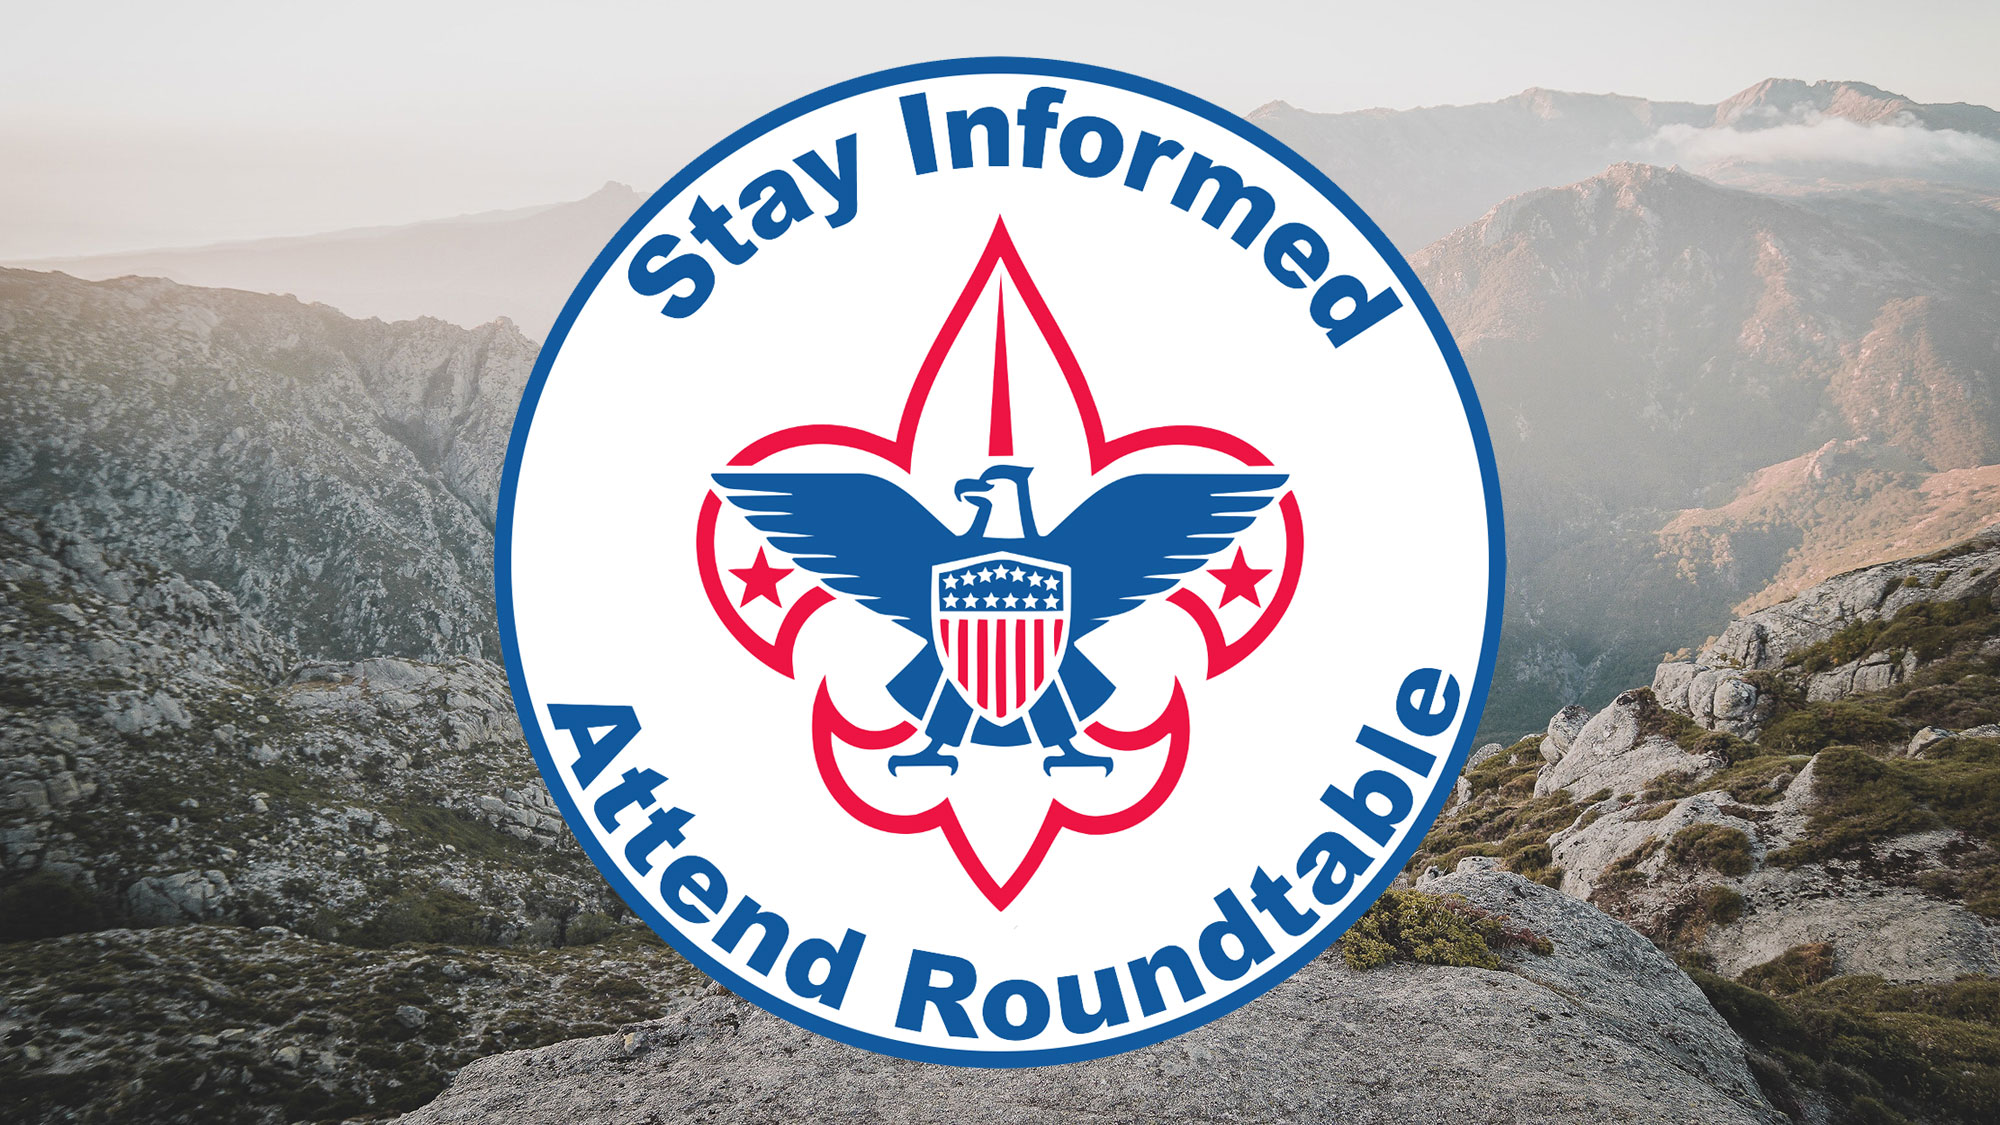 Roundtable Graphic on top of mountain trail.